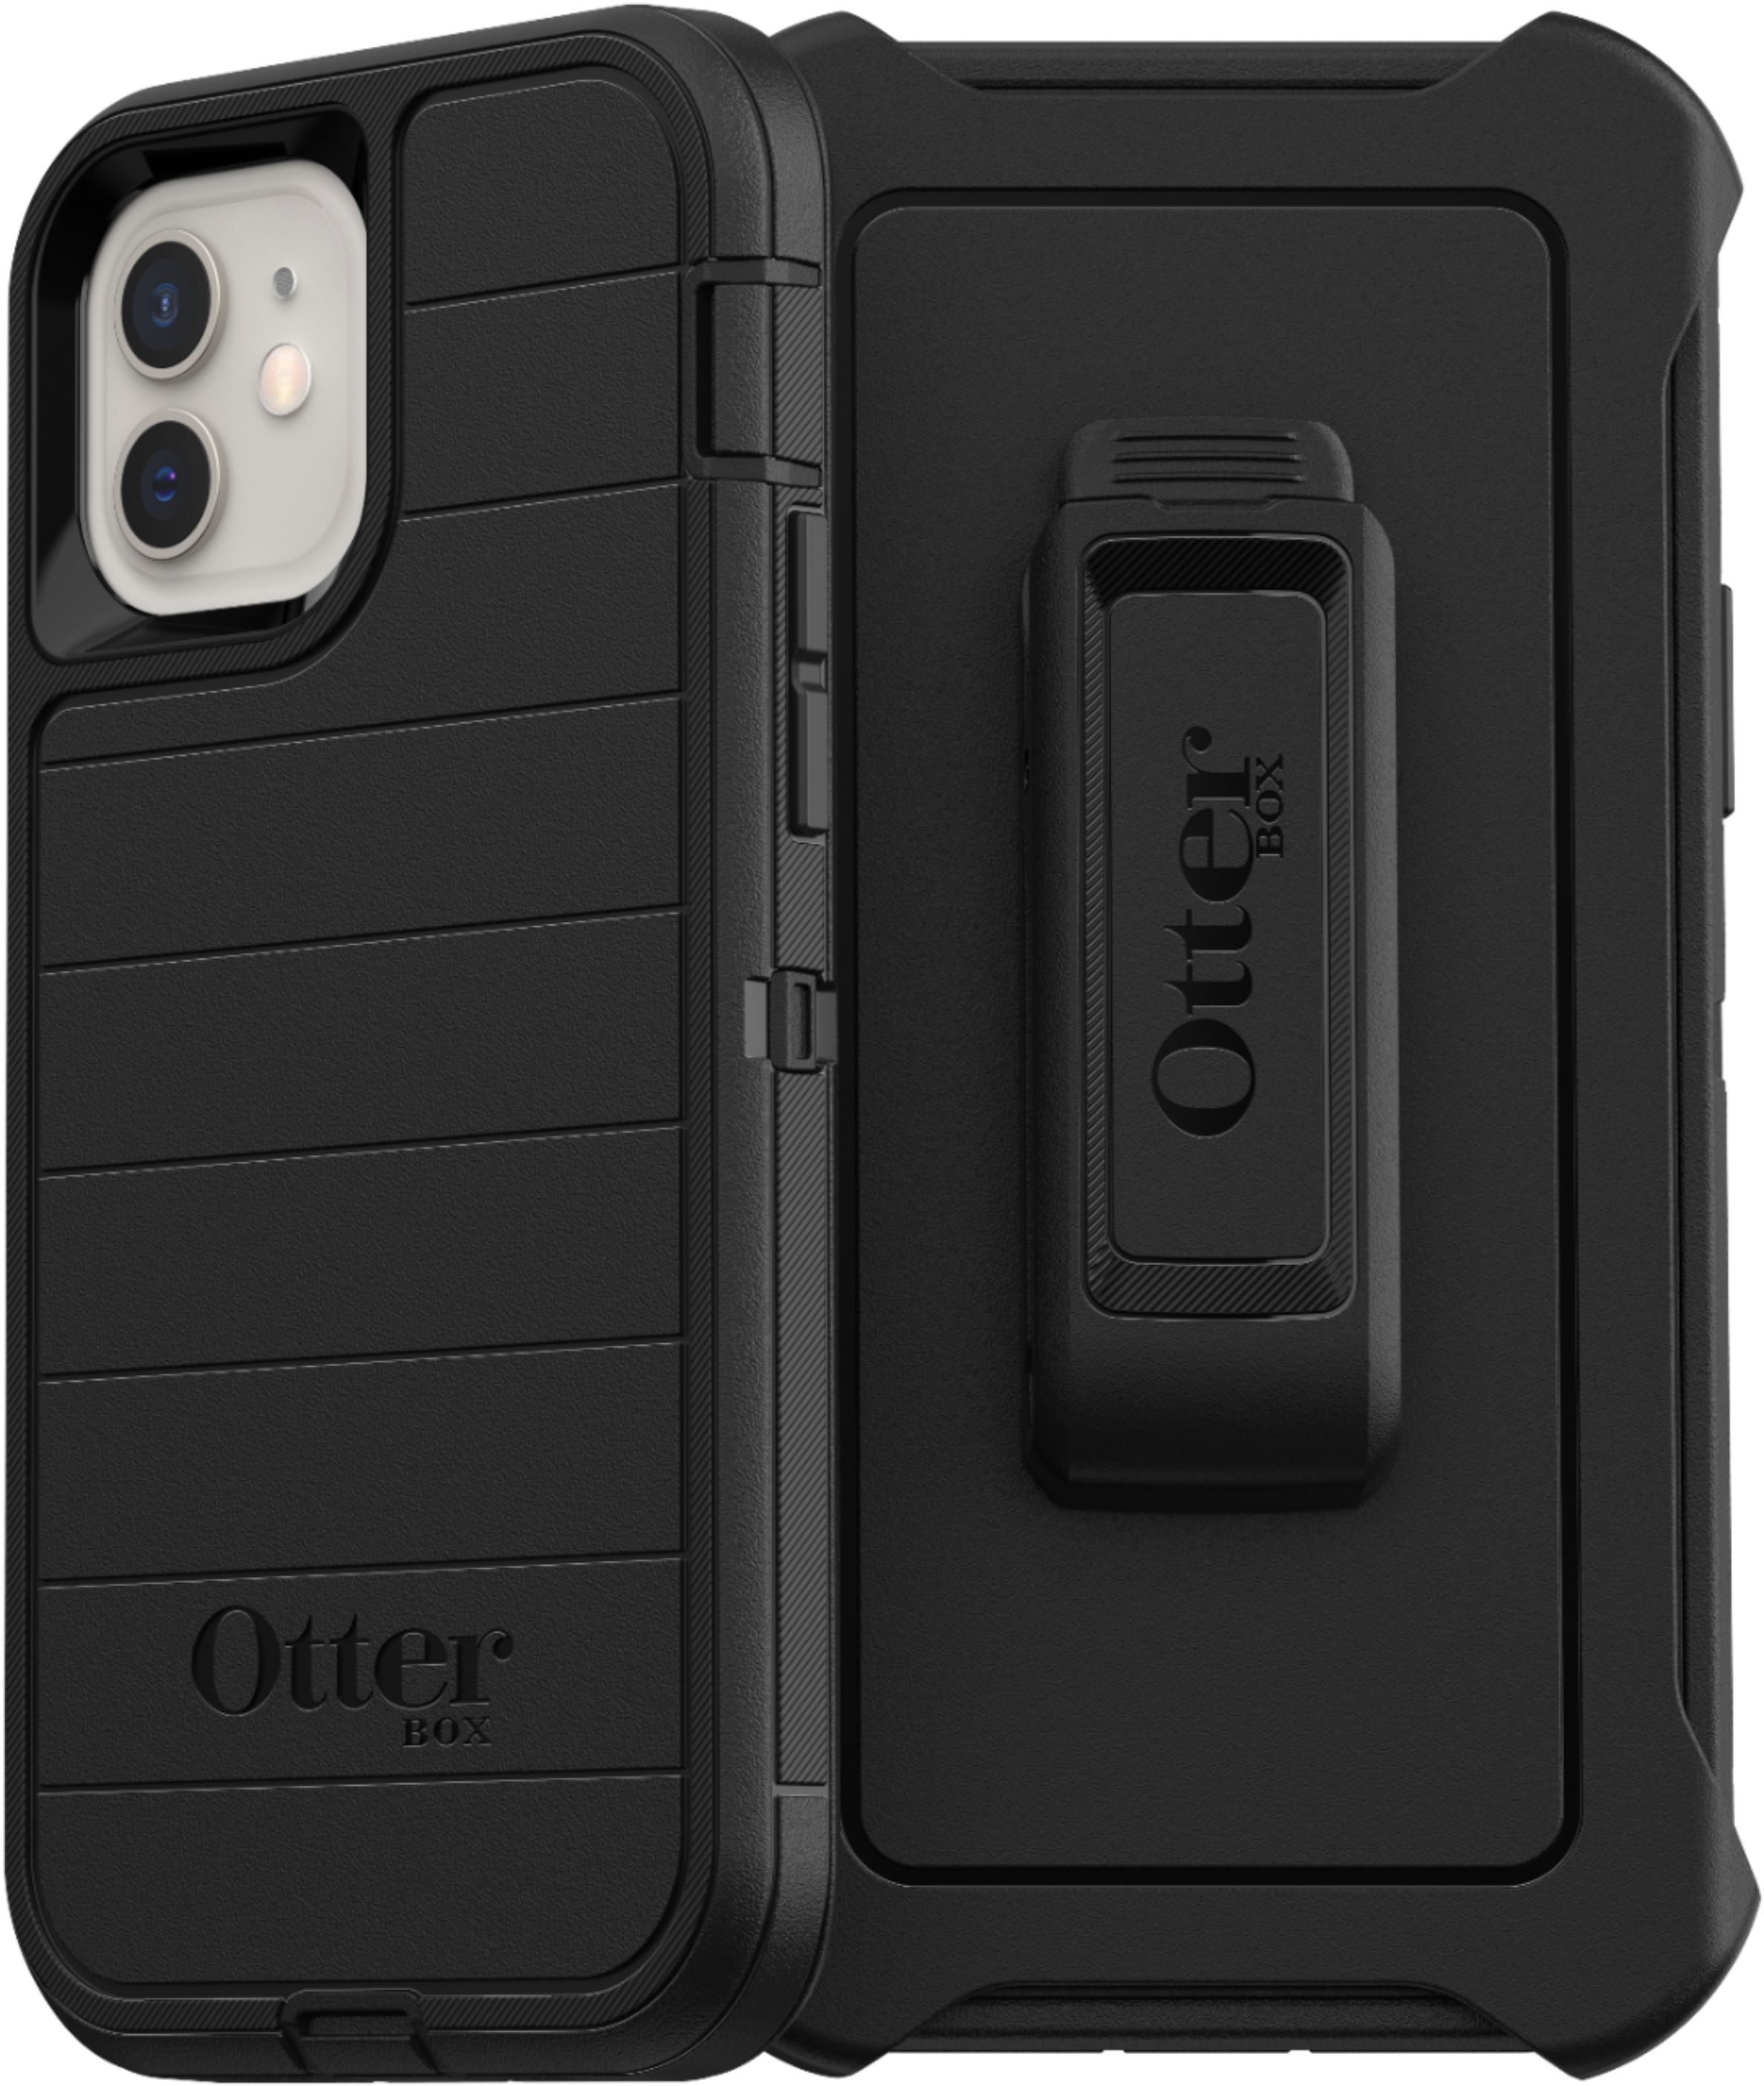 Angle View: OtterBox - Defender Series Pro for Apple® iPhone® 12 and iPhone 12 Pro - Black